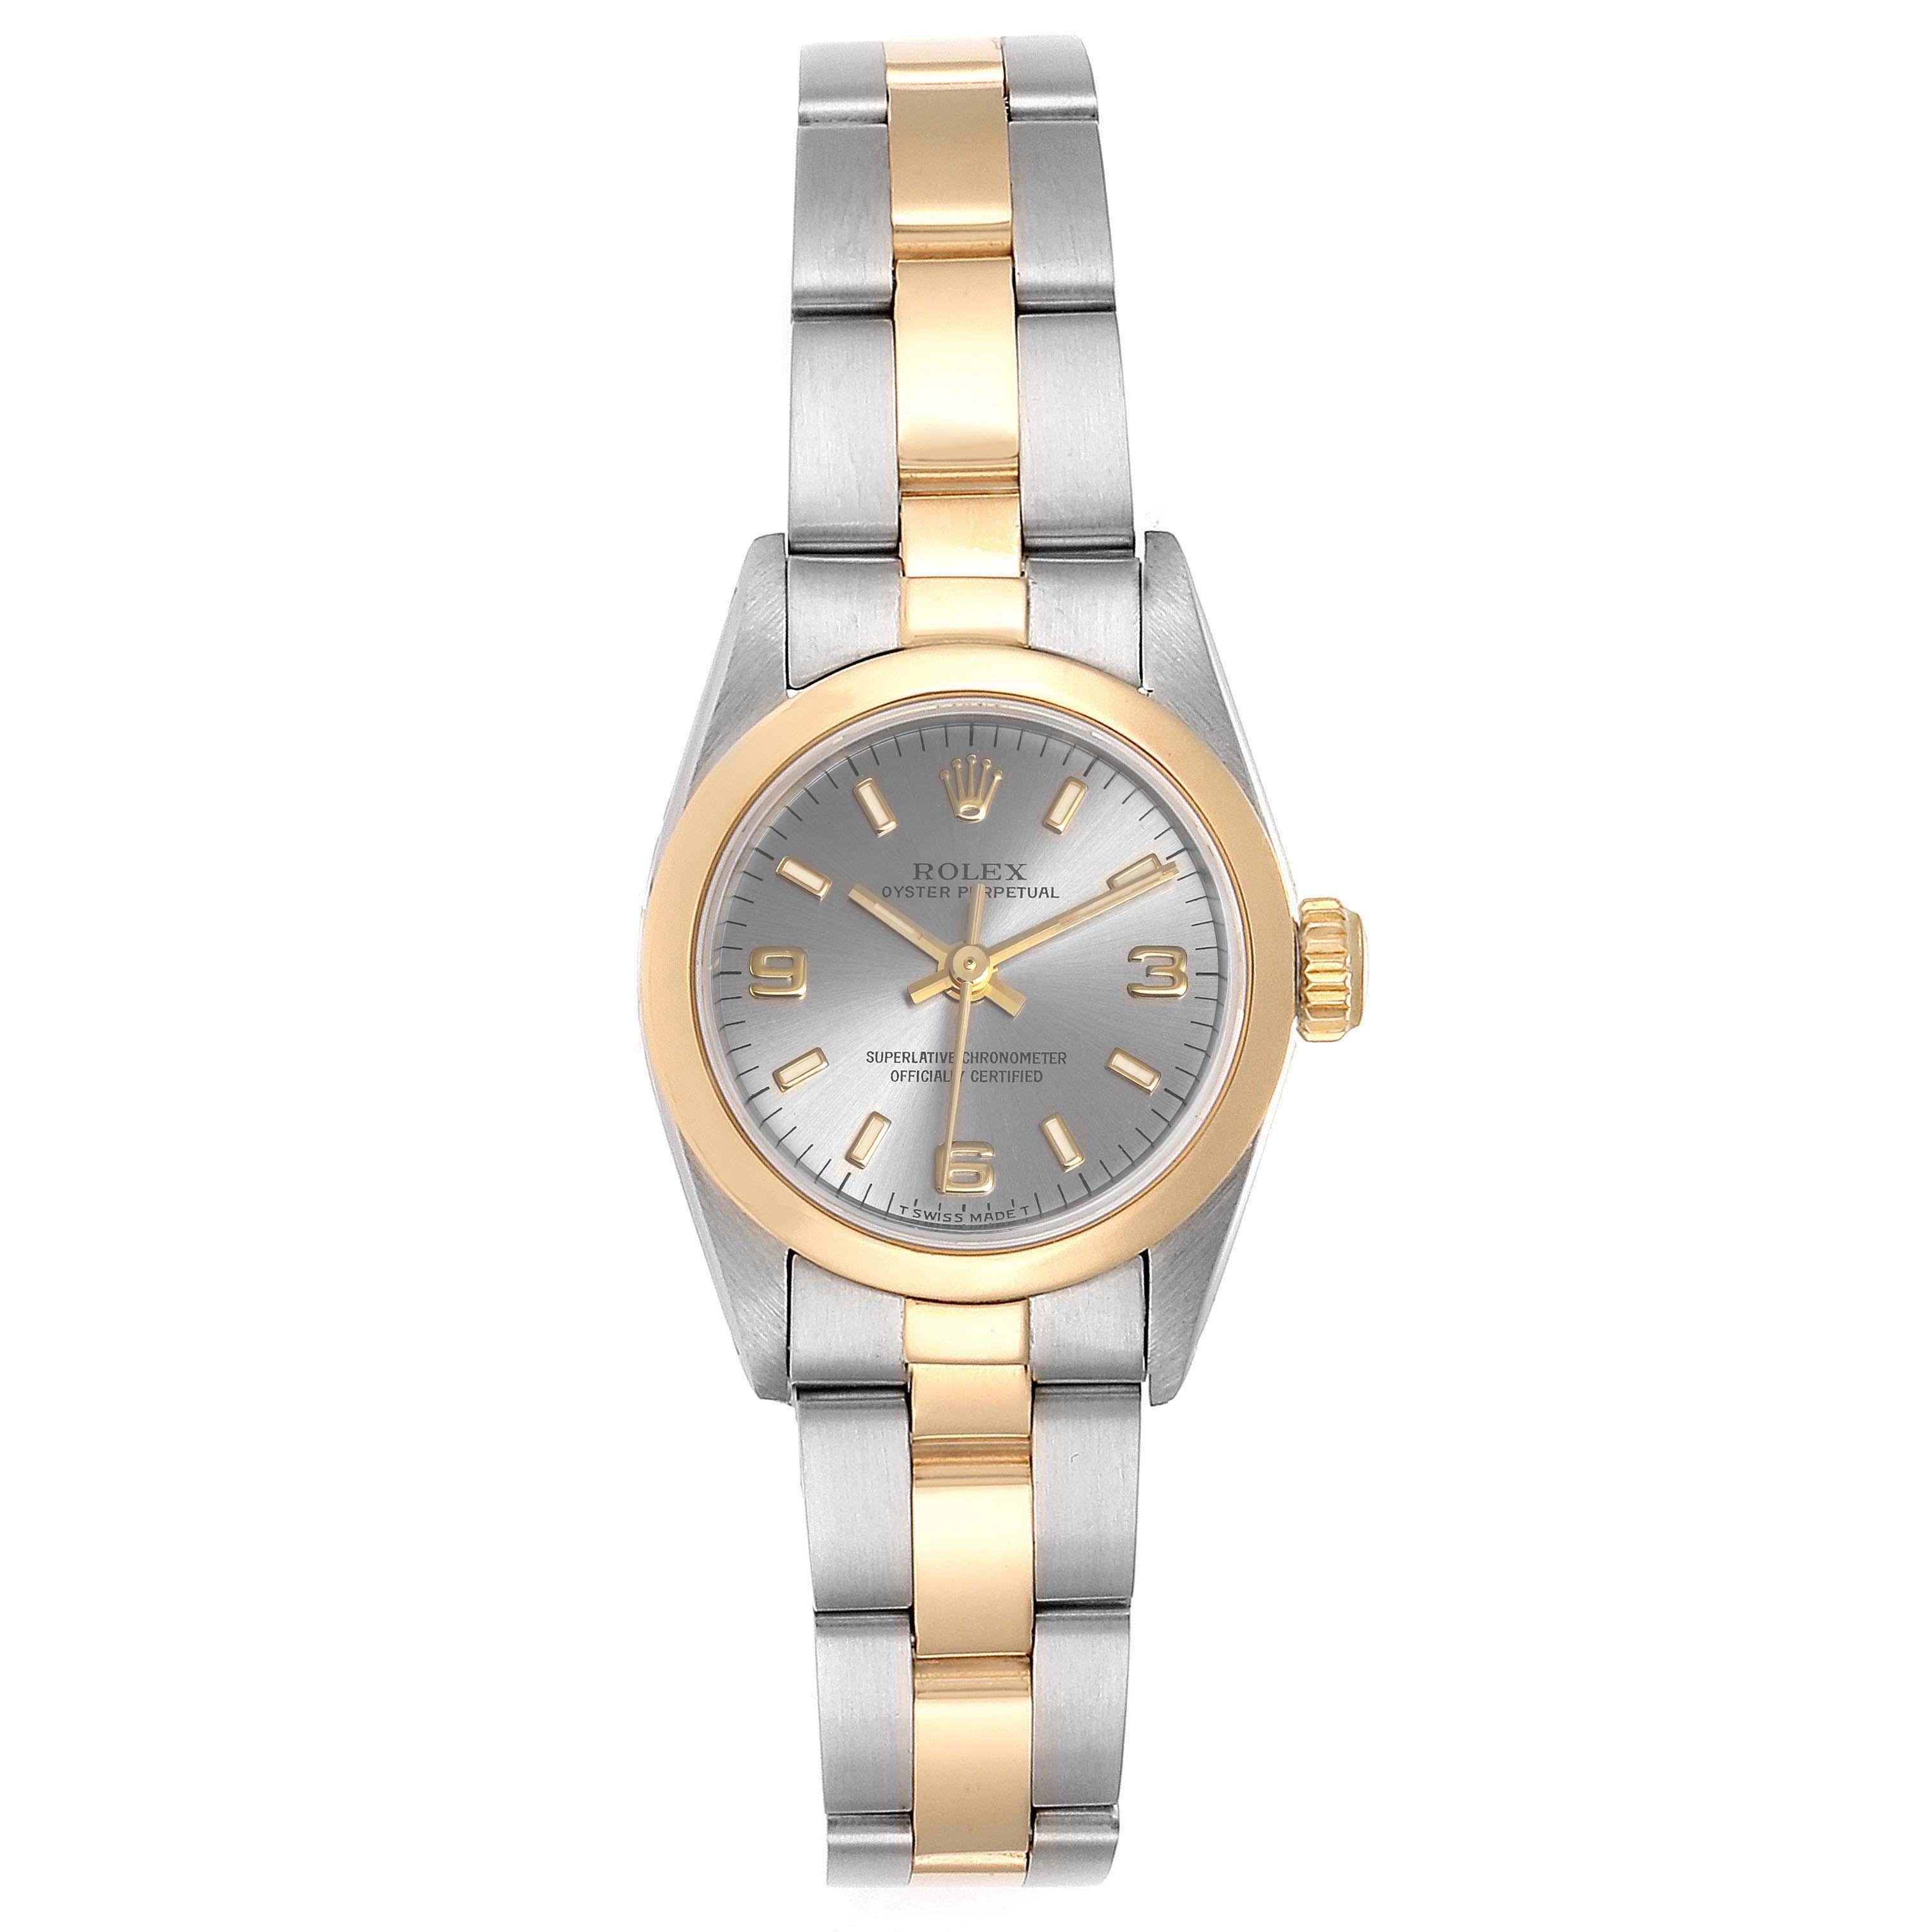 Rolex Oyster Perpetual NonDate Steel Yellow Gold Ladies Watch 67183. Officially certified chronometer self-winding movement. Stainless steel oyster case 24.0 mm in diameter. Rolex logo on a 18k yellow gold crown. 18k yellow gold smooth bezel.